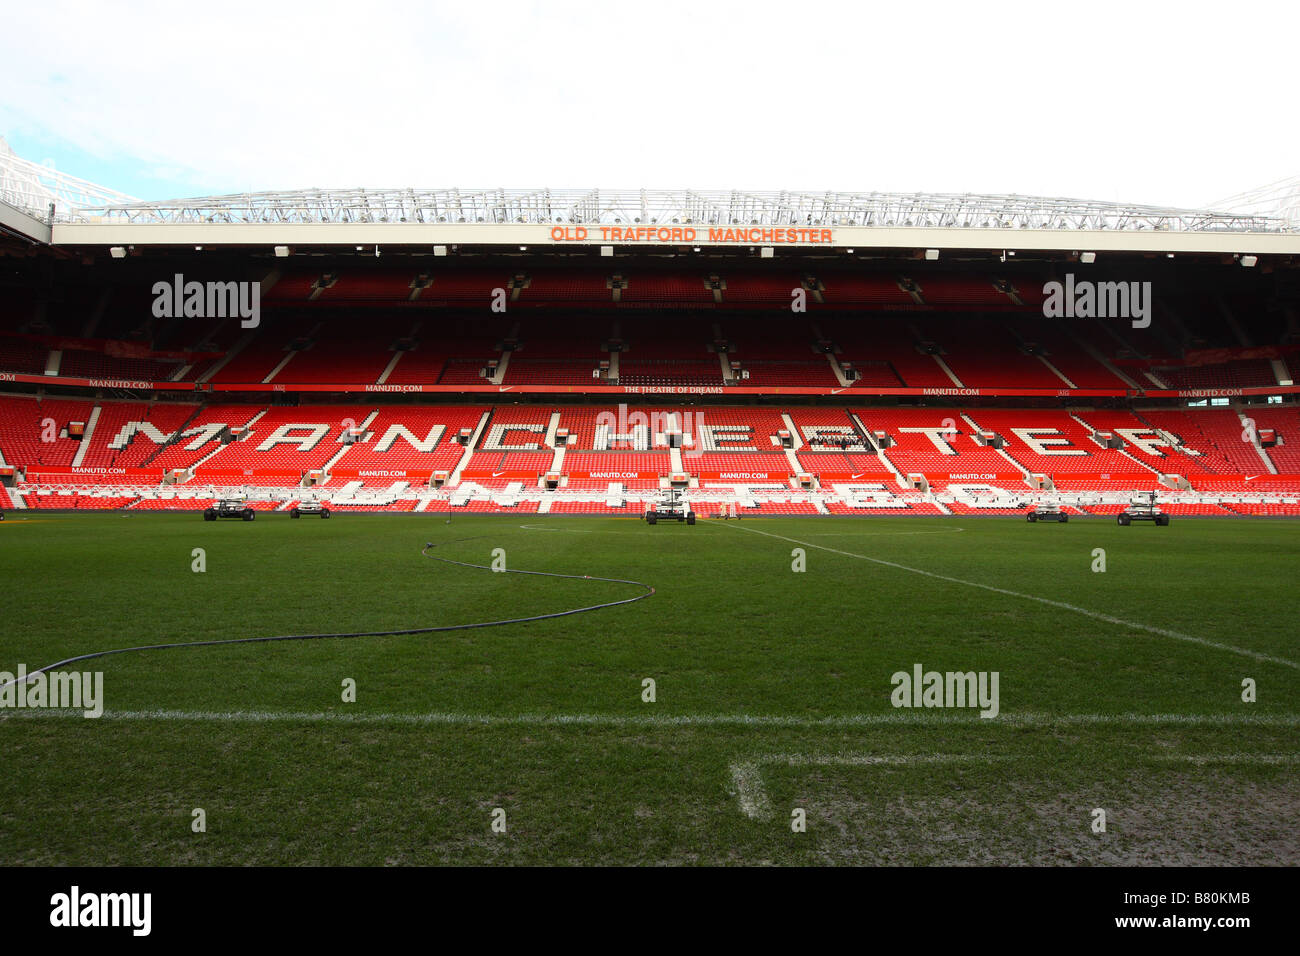 Manchester United Football Ground, Old Trafford Stock Photo